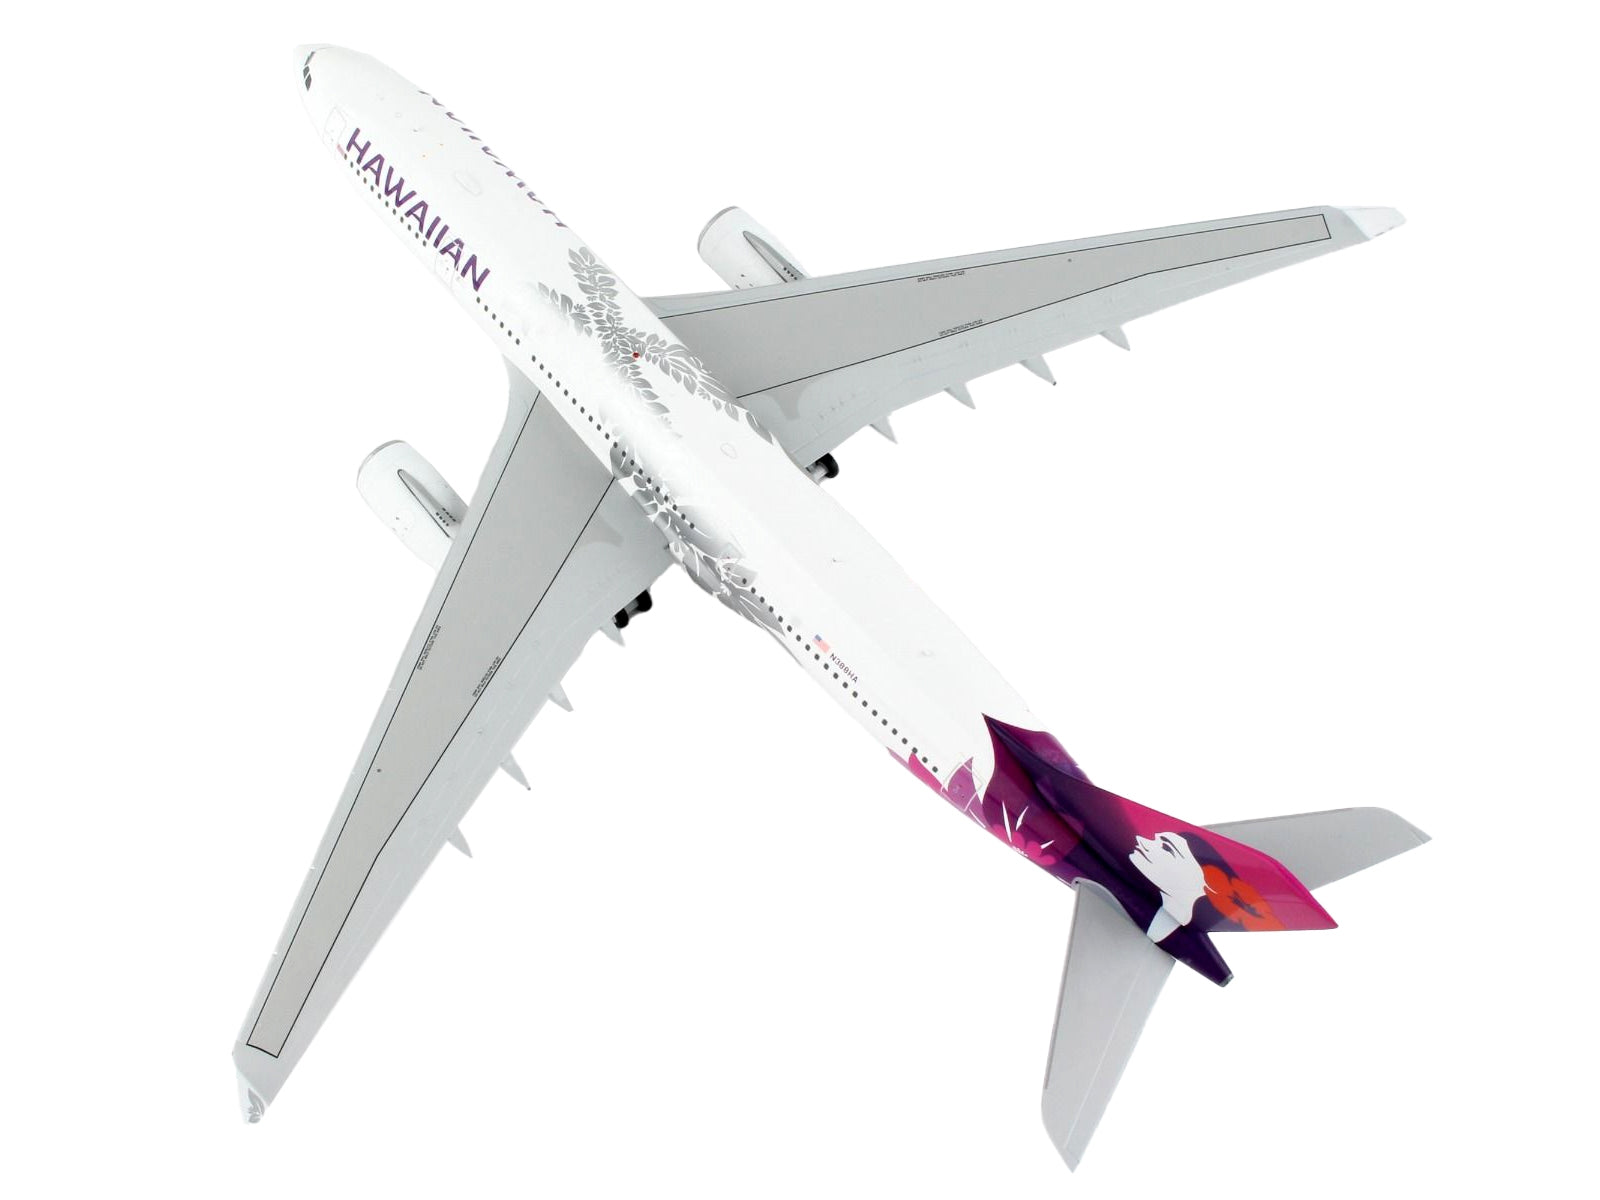 Airbus A330-200 Commercial Aircraft "Hawaiian Airlines" White with Purple Tail "Gemini 200" Series 1/200 Diecast Model Airplane by GeminiJets